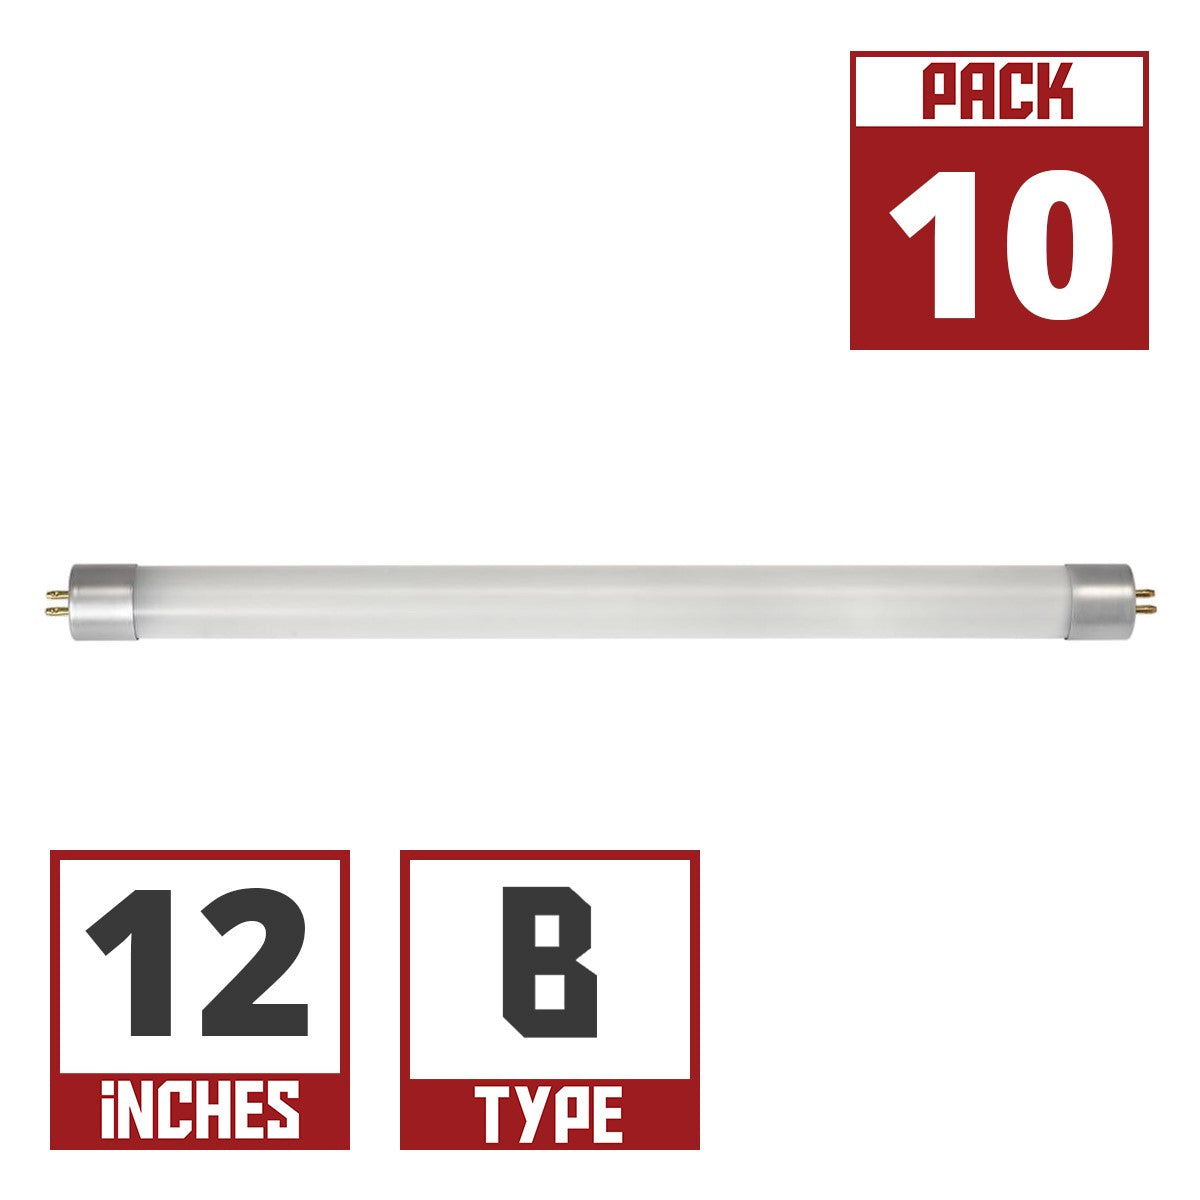 12 Inch LED mini T5 Tube, 4 watt, 400 Lumens, 4000K, F6T5 Replacement, Ballast Bypass Double End, G5 Base (Case Of 10)